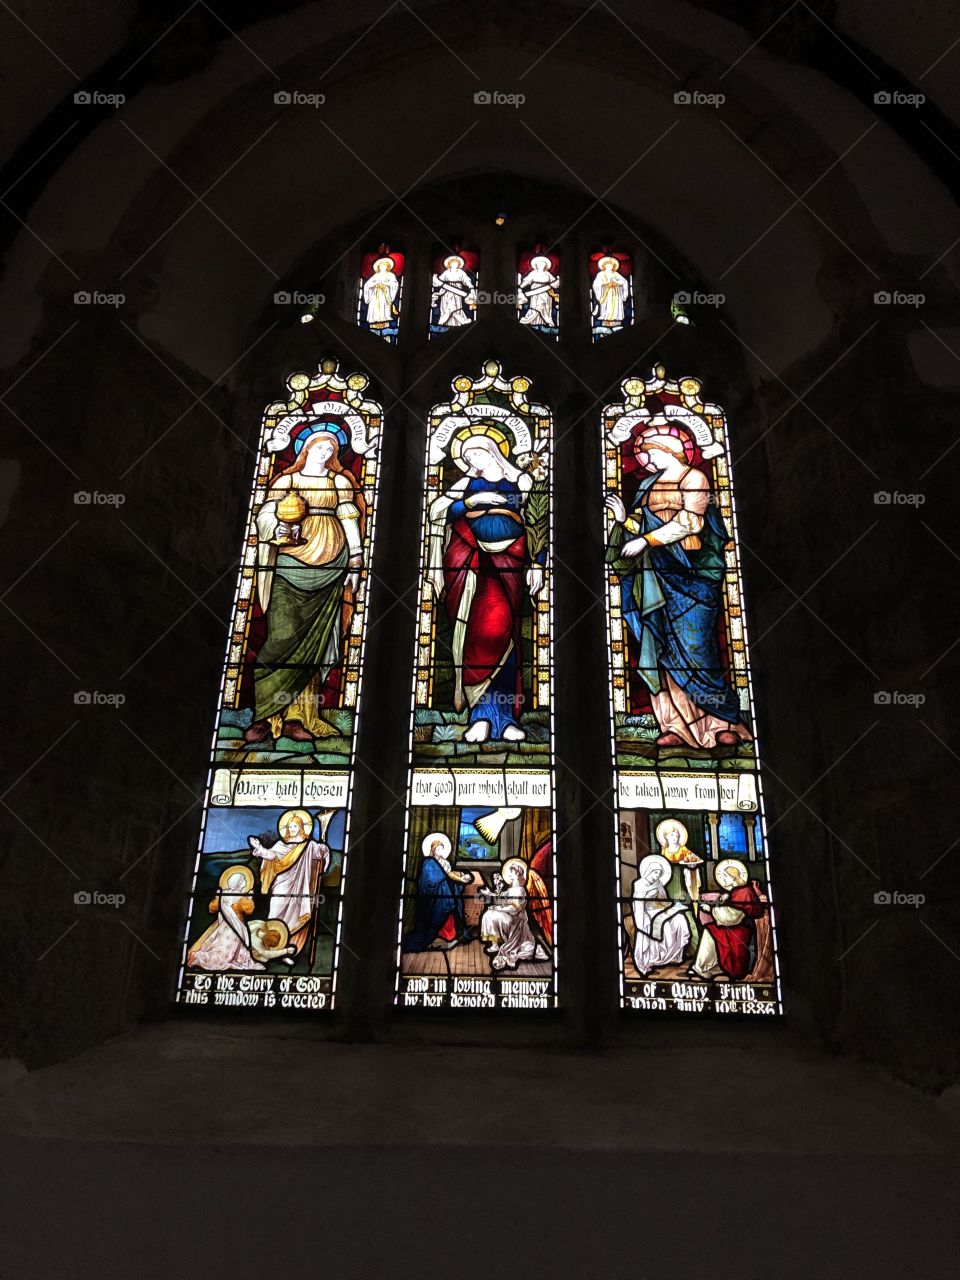 A very splendid stained glass window, on prominent display at St Pancras Church in Widecombe in the Moor, Dartmoor.